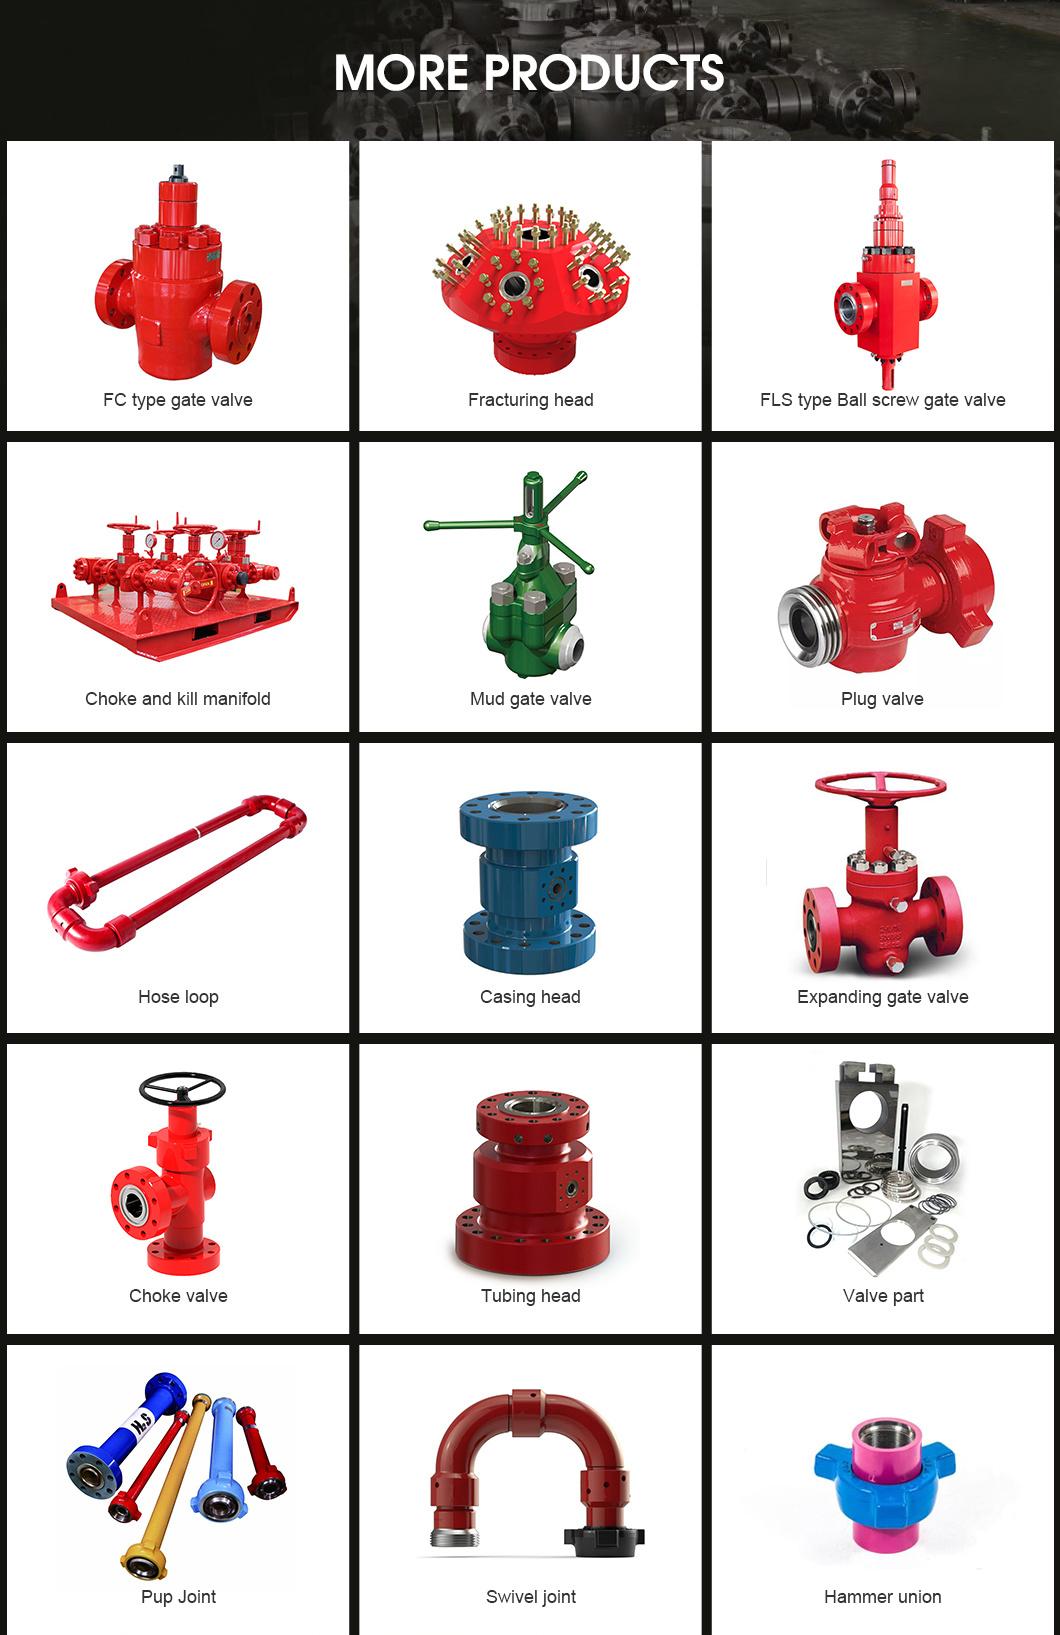 API 6A Wellhead Christmas Tree Equipment for Oil and Gas Well